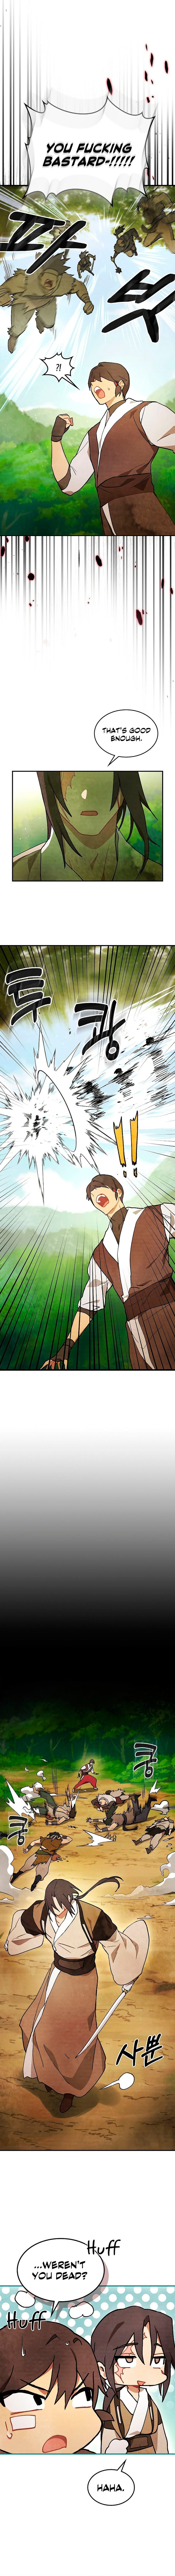 chronicles-of-the-martial-gods-return-chap-31-2